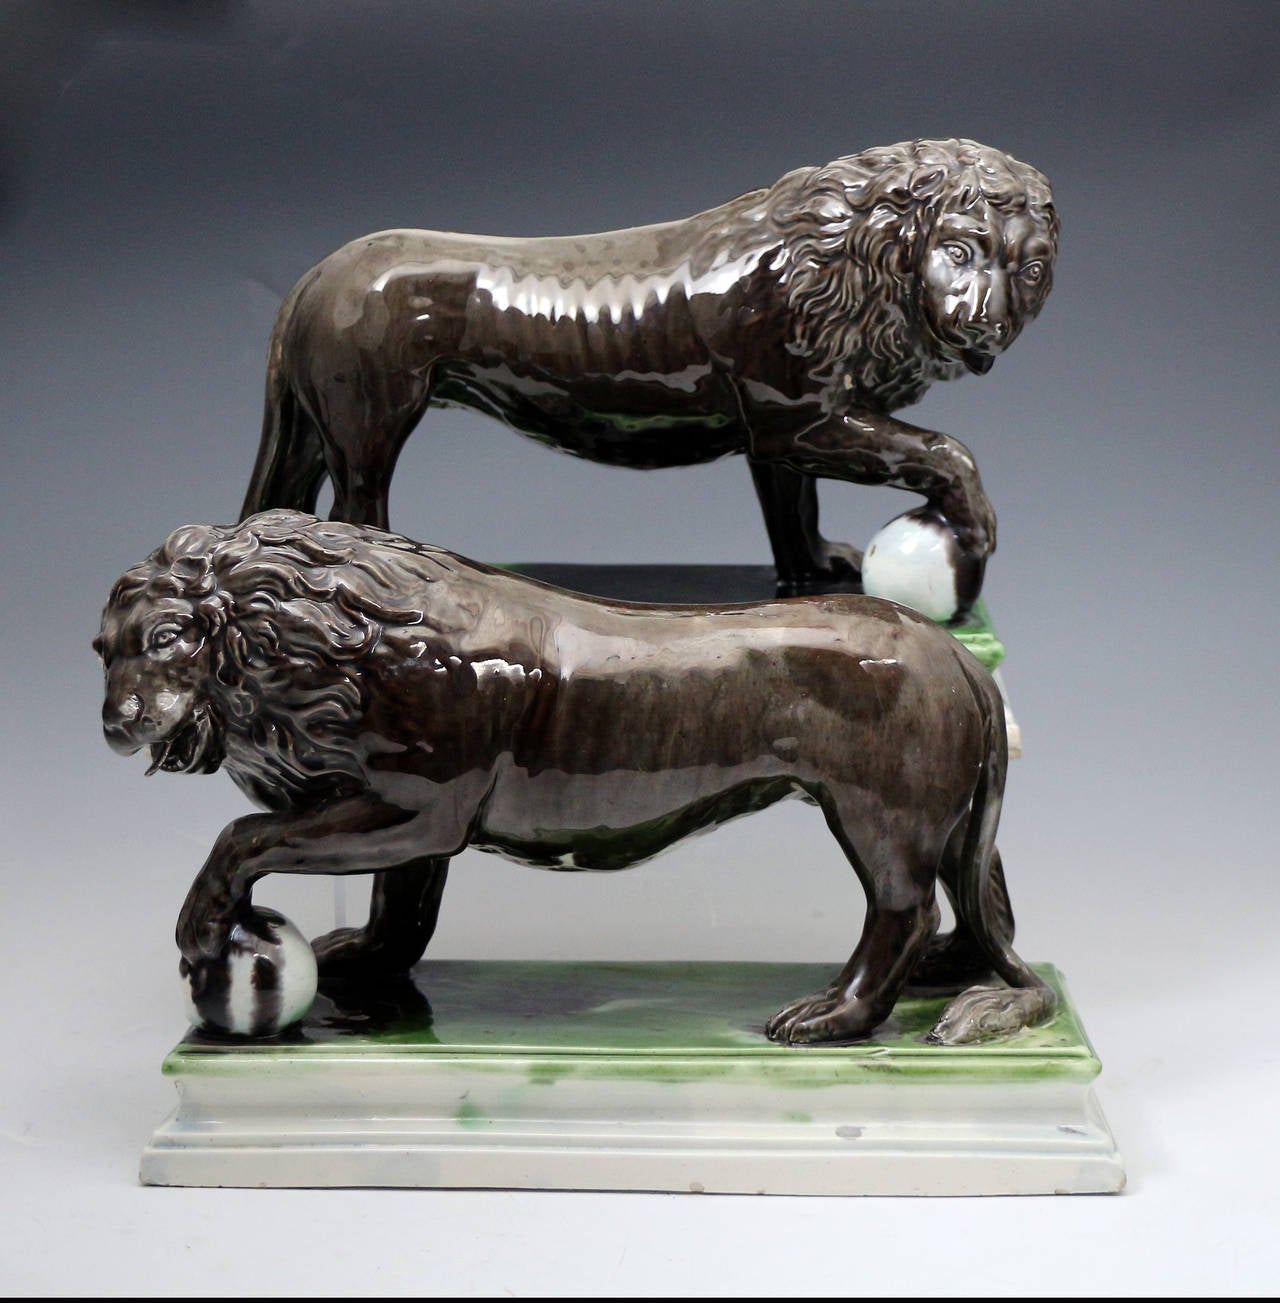 English Pair of Staffordshire Pottery Figures of Lions by Ralph Wood